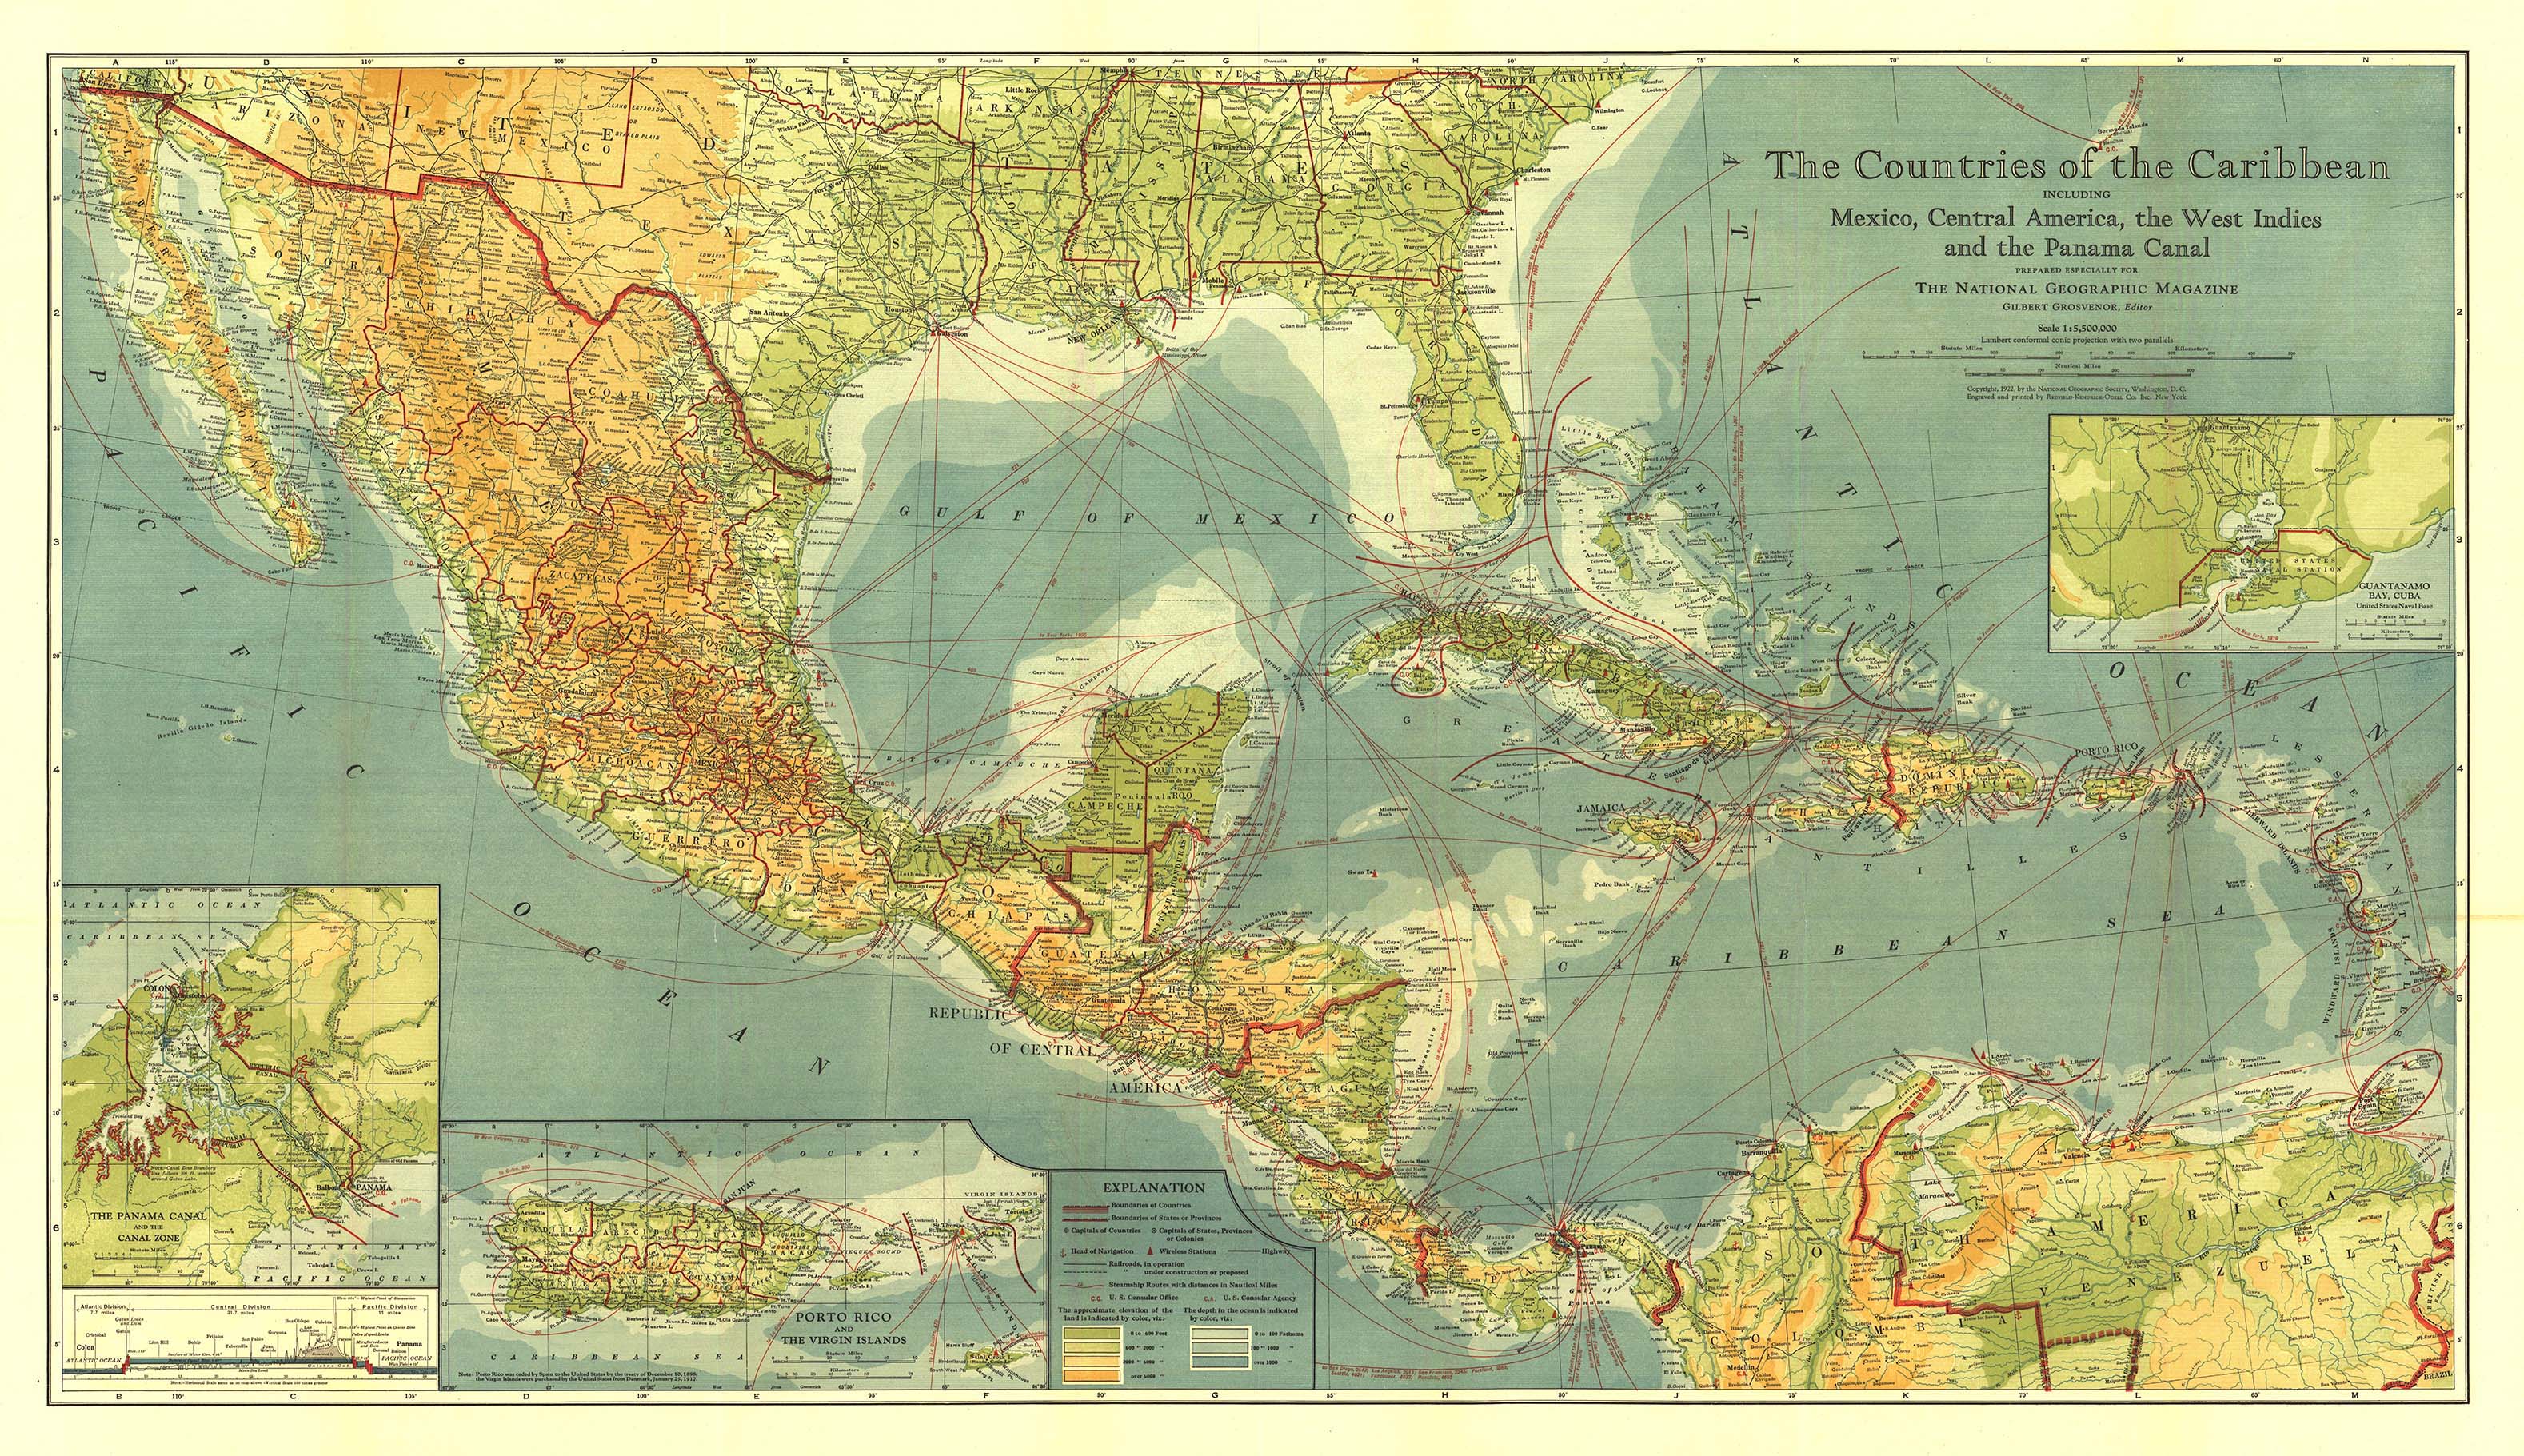 countries-of-the-caribbean-1922-wall-map-by-national-geographic